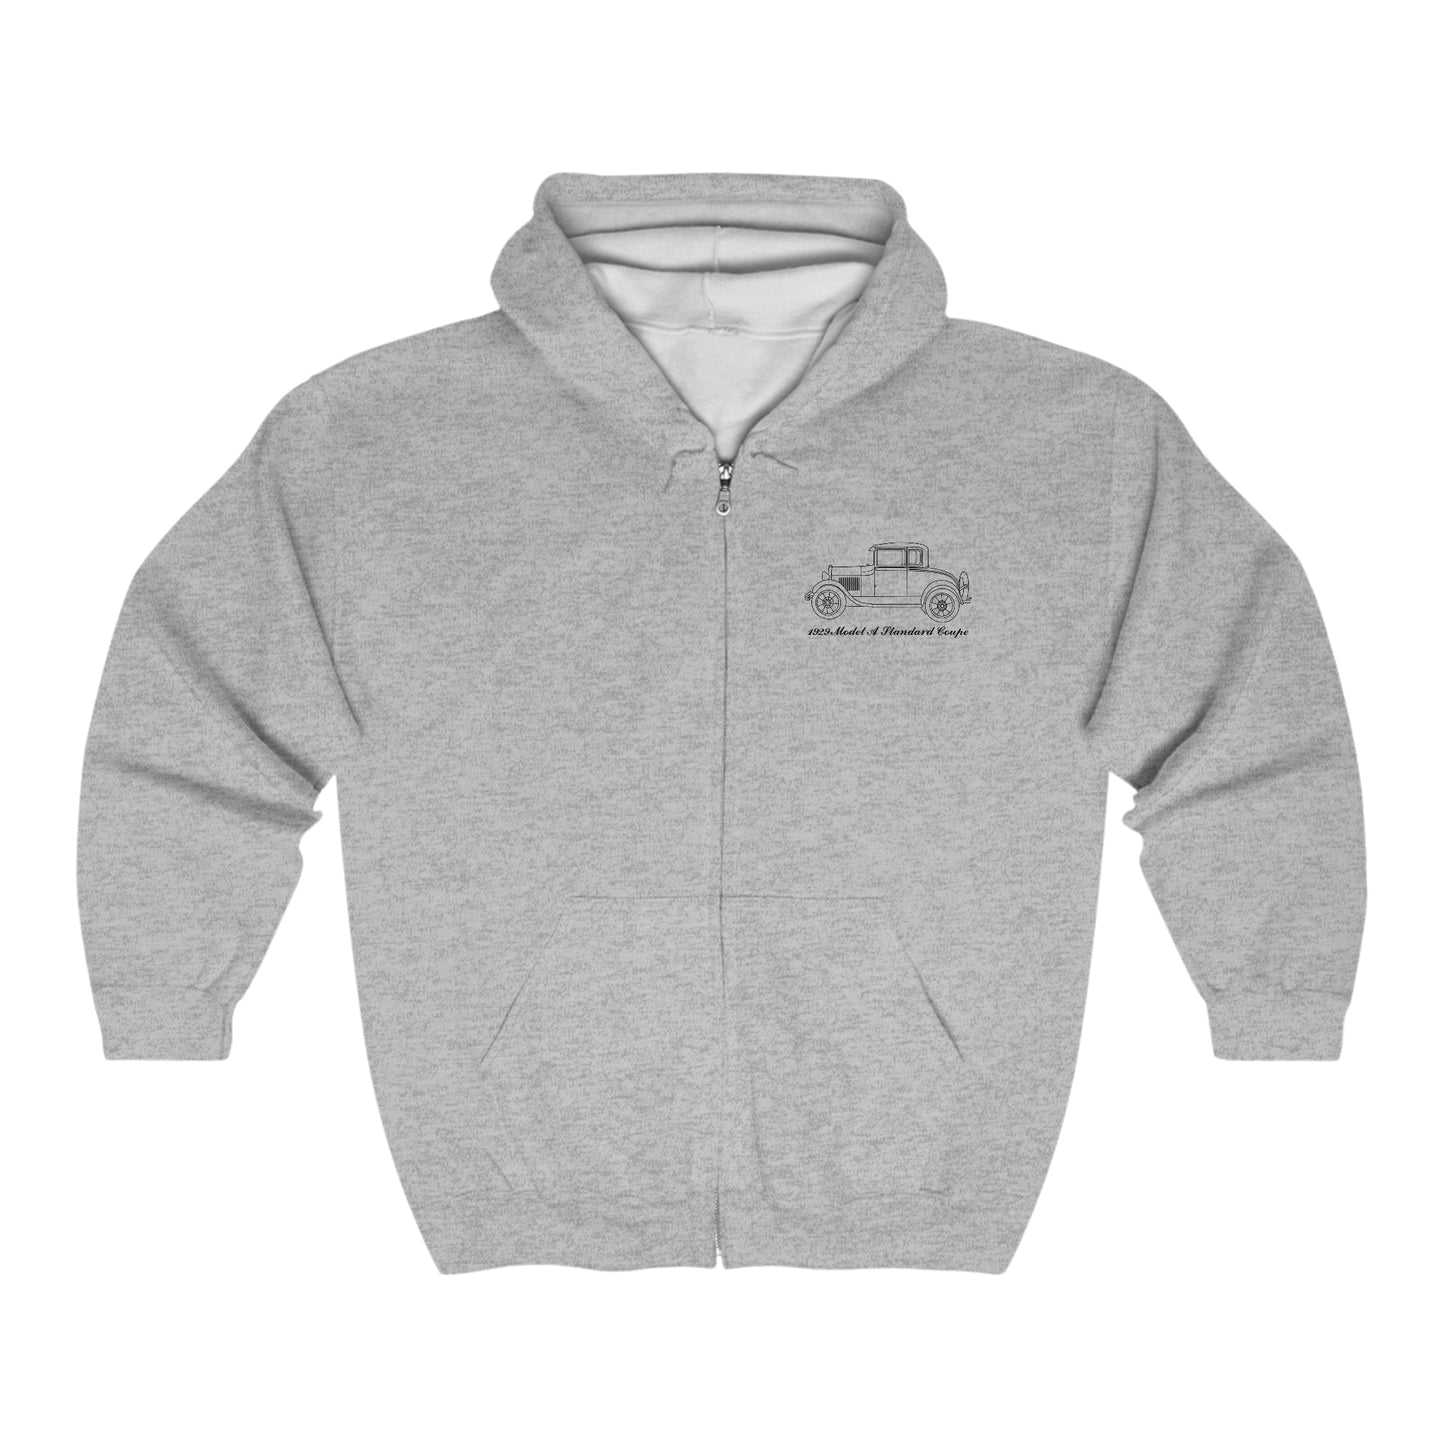 1929 Standard Coupe Hoodie